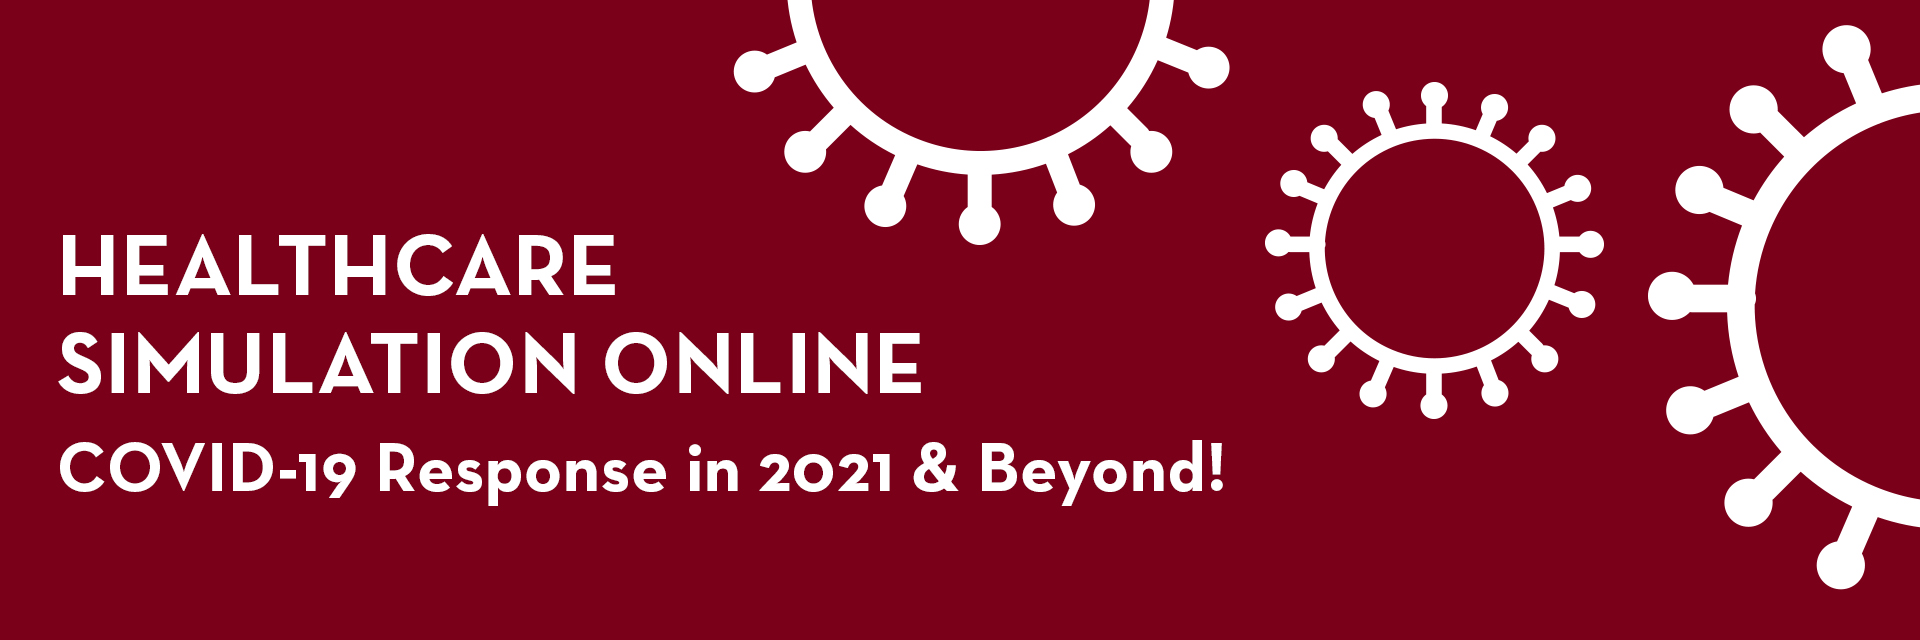 Healthcare Simulation online: COVID-19  Response in 2021 & Beyond